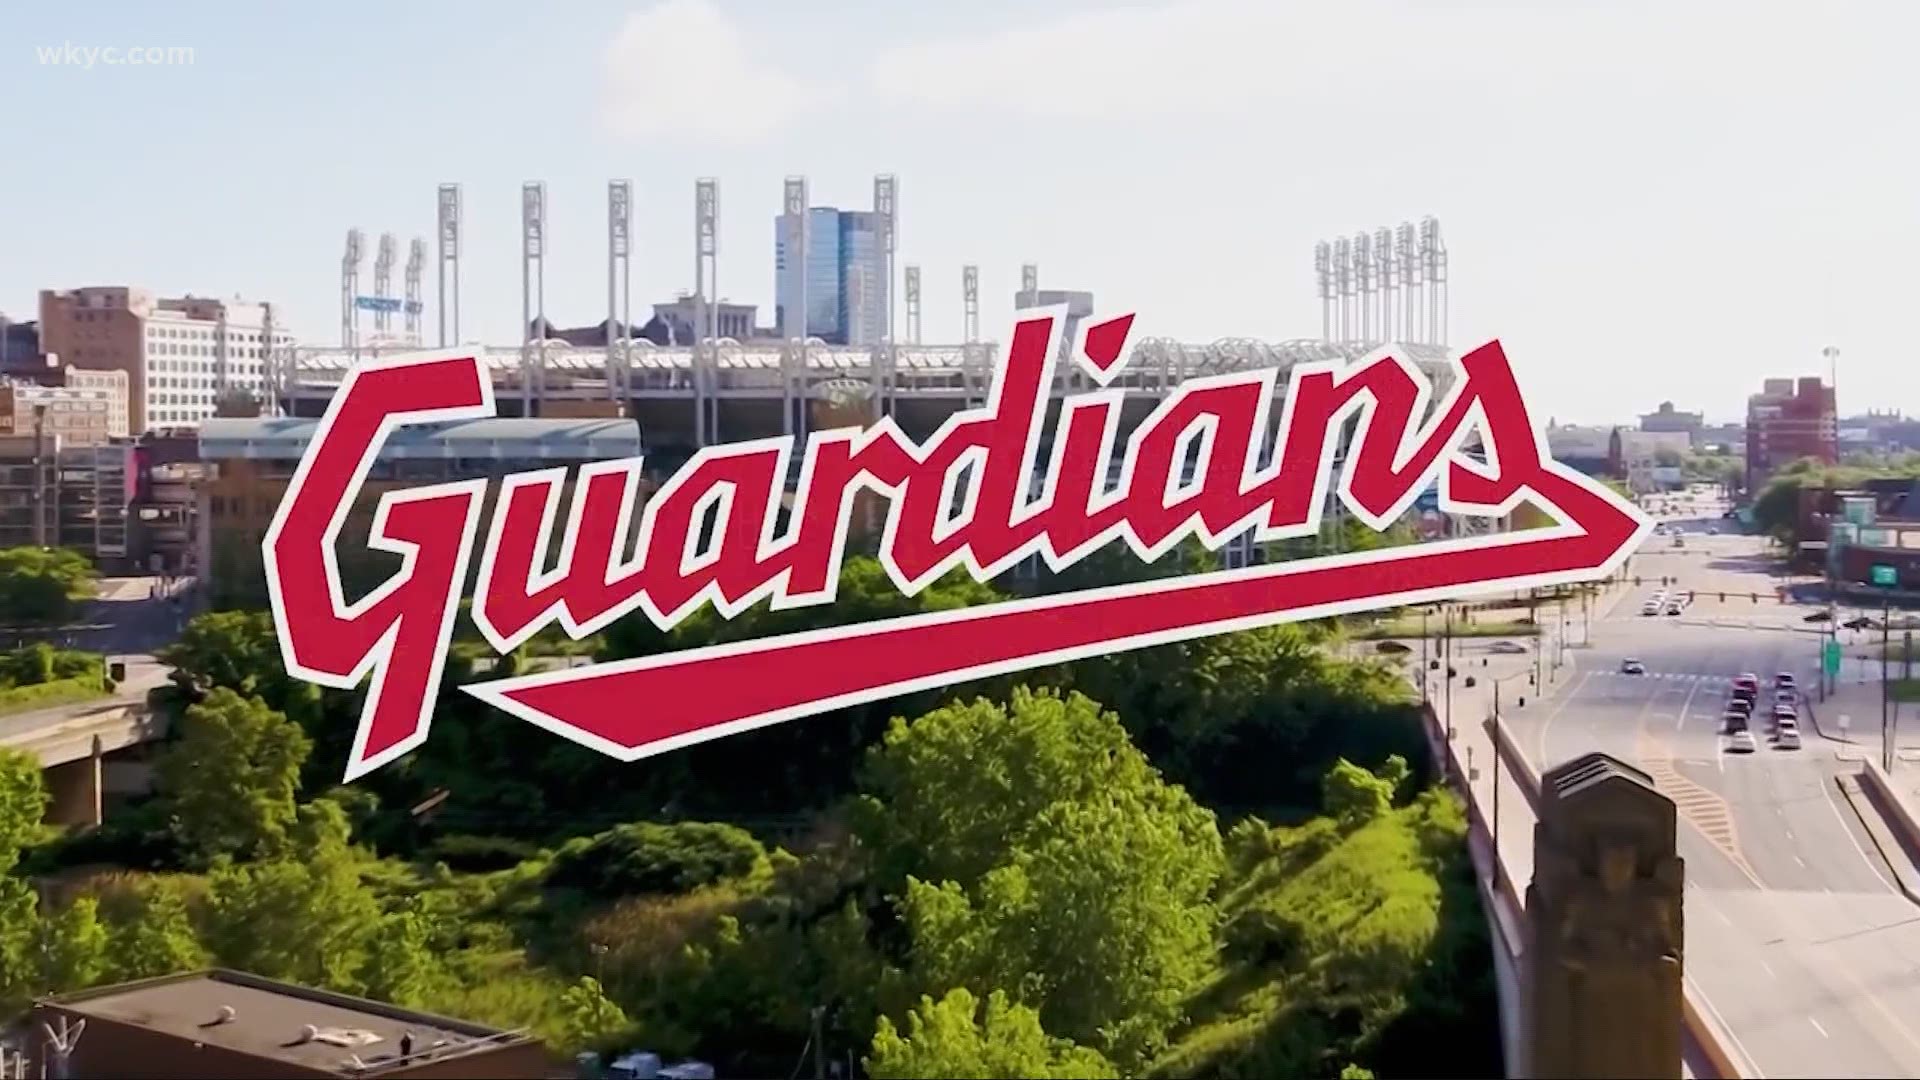 Greater Cleveland Sports Commission CEO David Gilbert shared his reaction to the Cleveland Indians' new name. Sara Shookman reports.